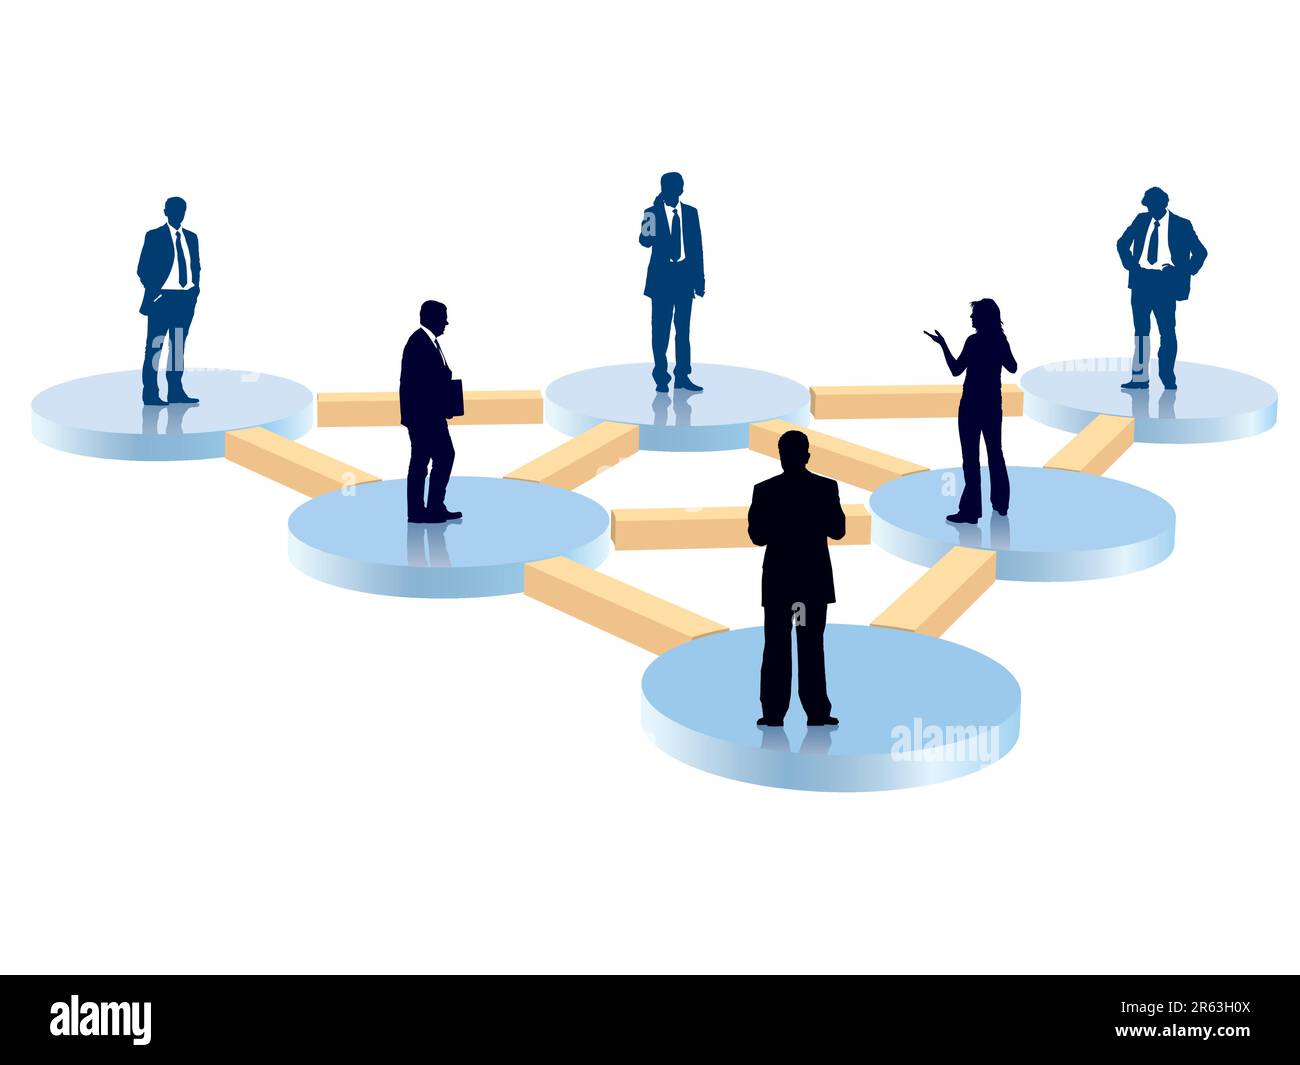 People in the organization chart, conceptual business illustration. Stock Vector